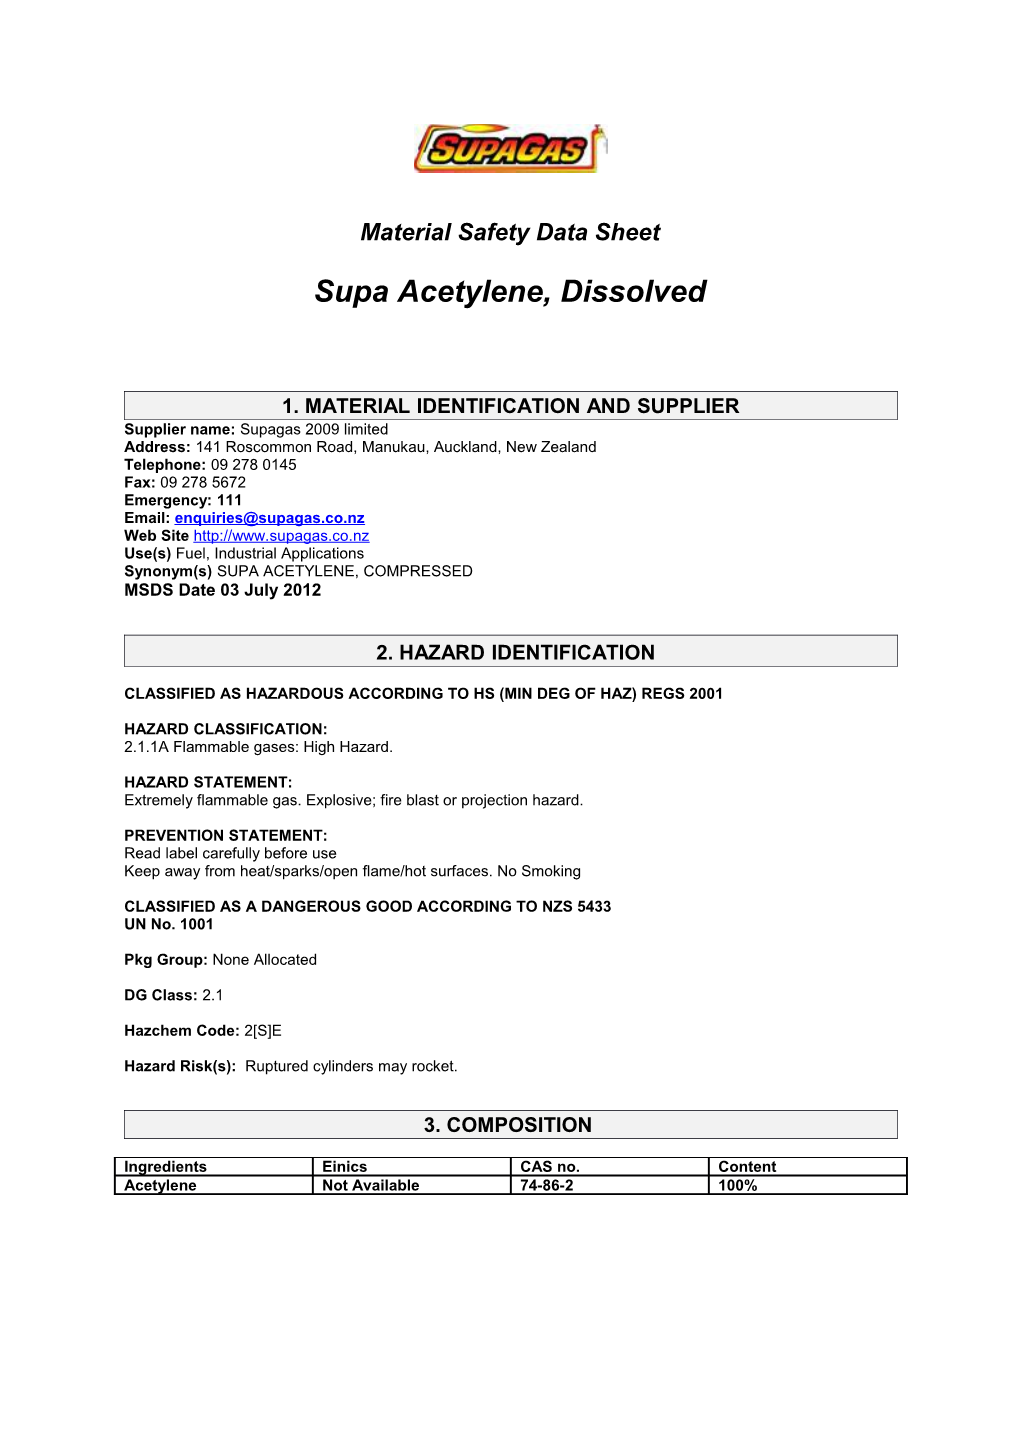 Material Safety Data Sheet s107